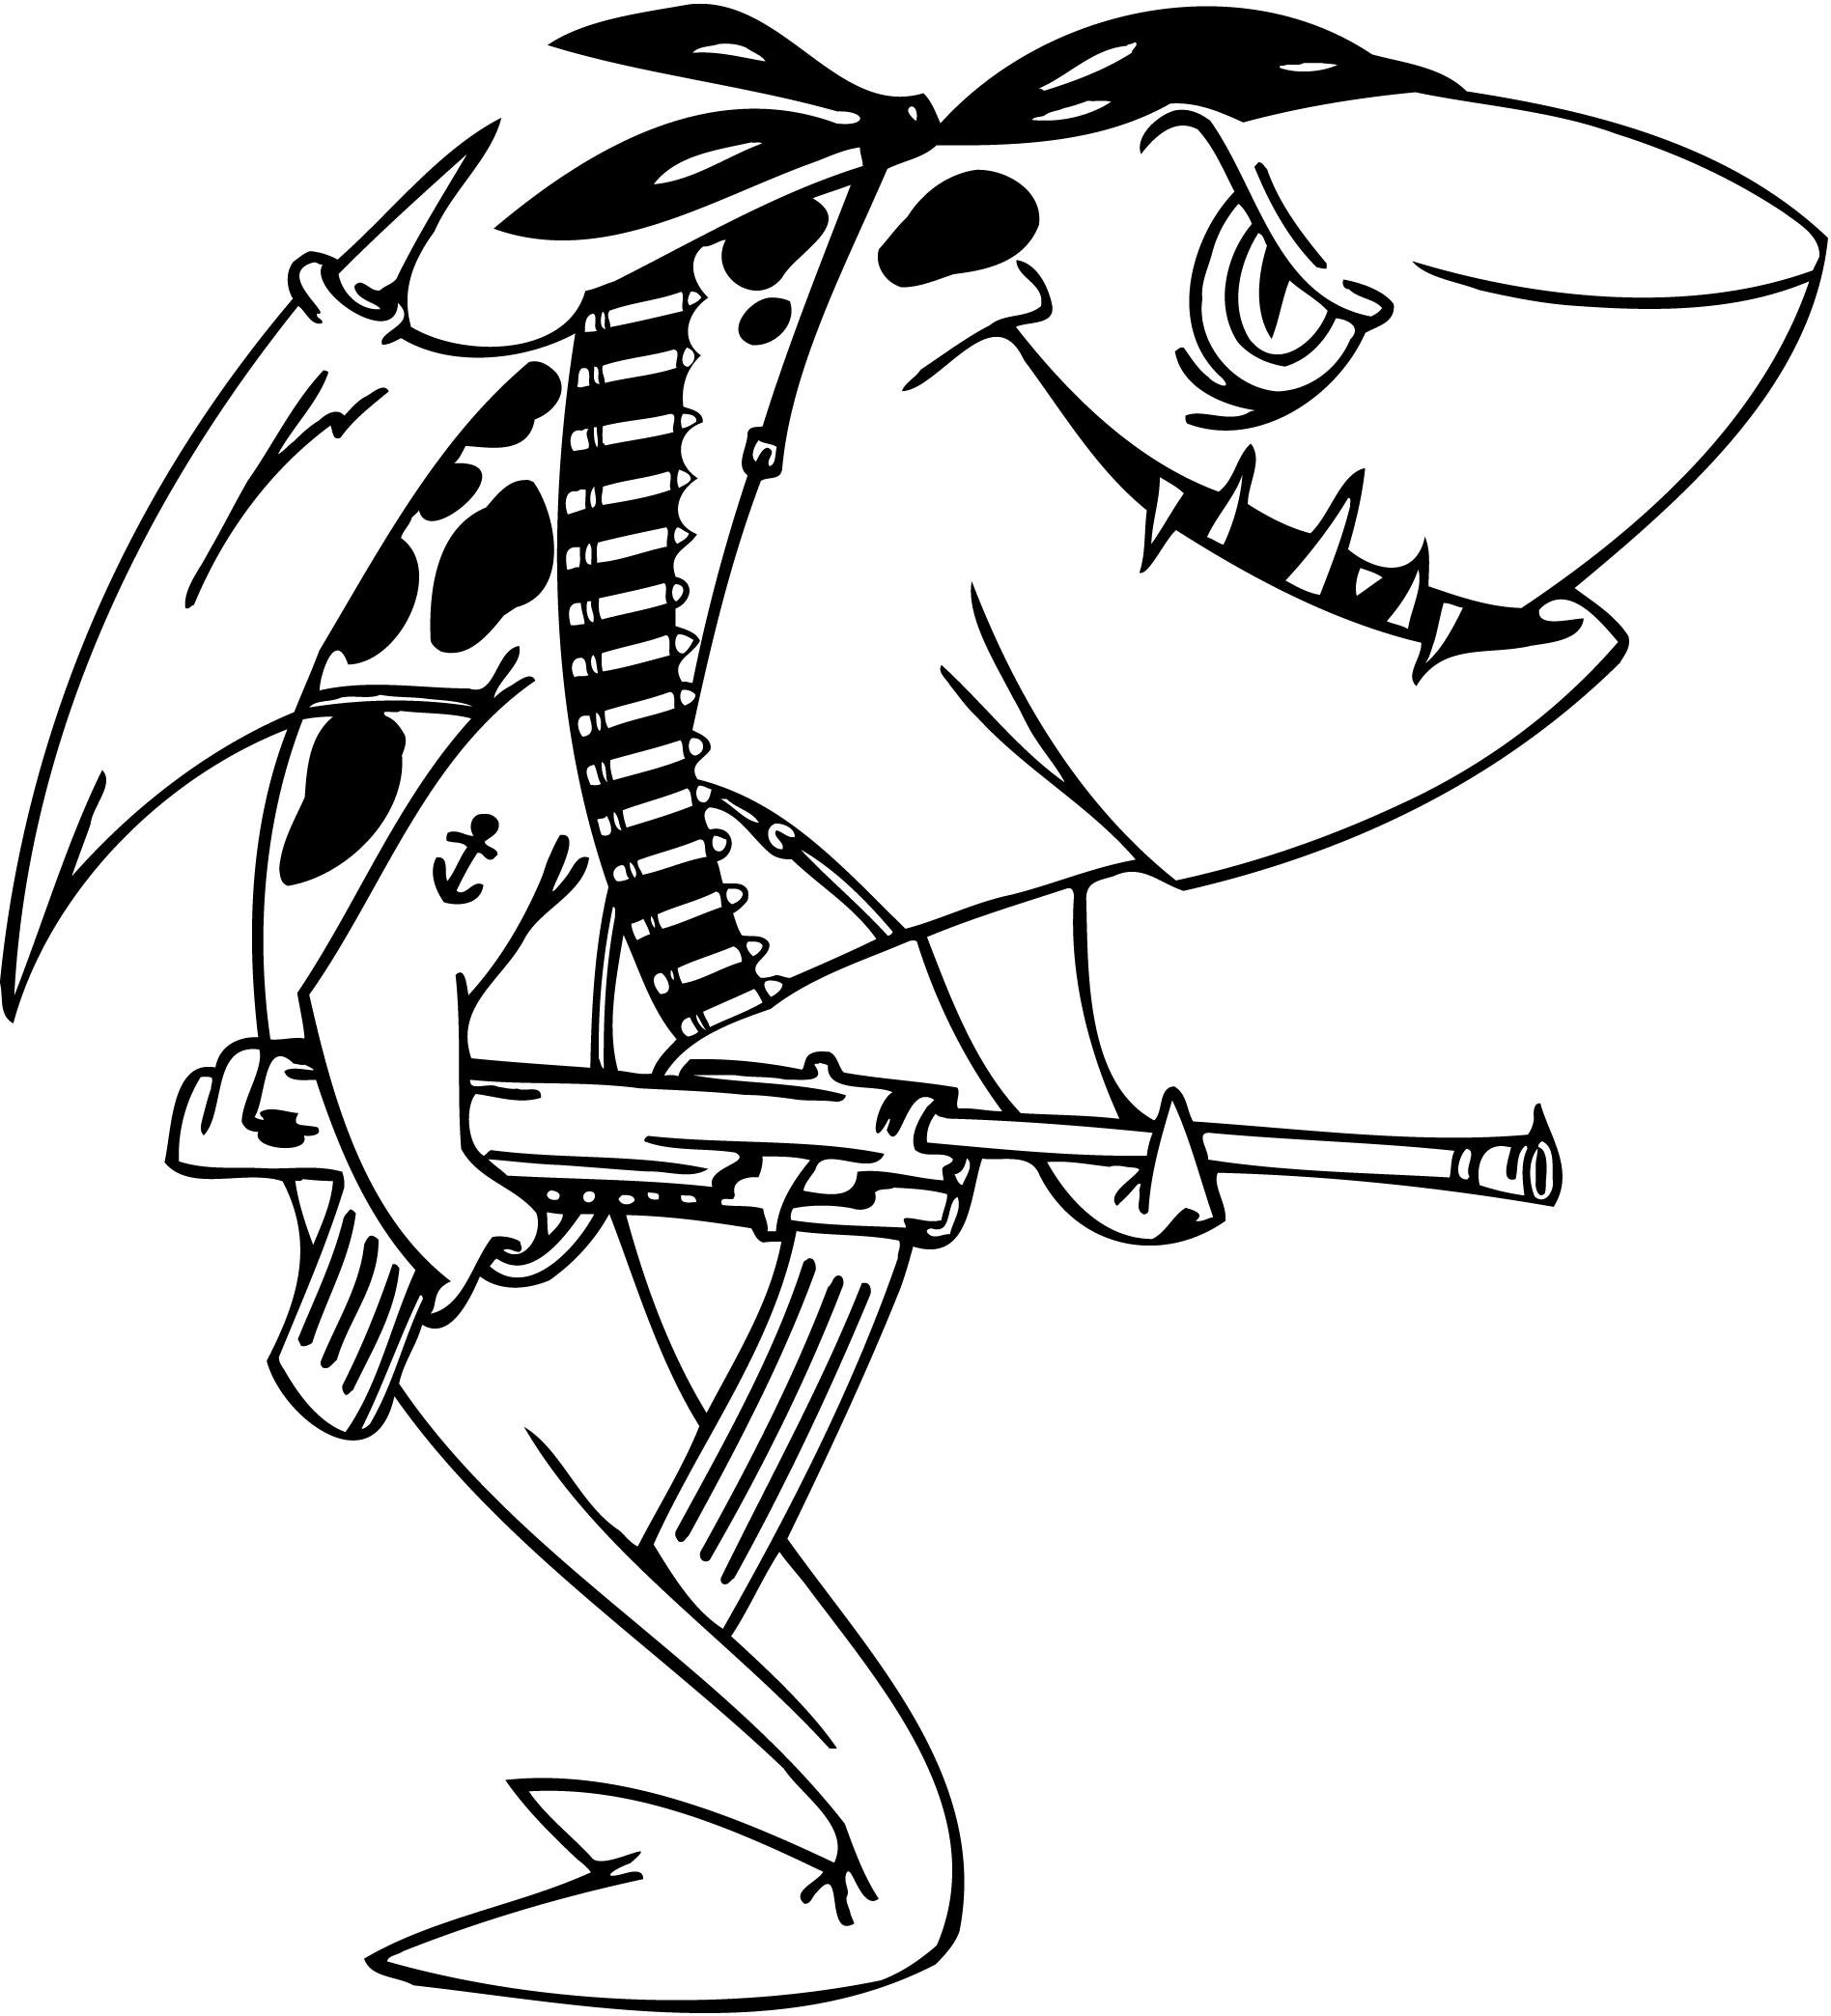 Baby Shark Coloring Pages at GetColorings.com | Free ...